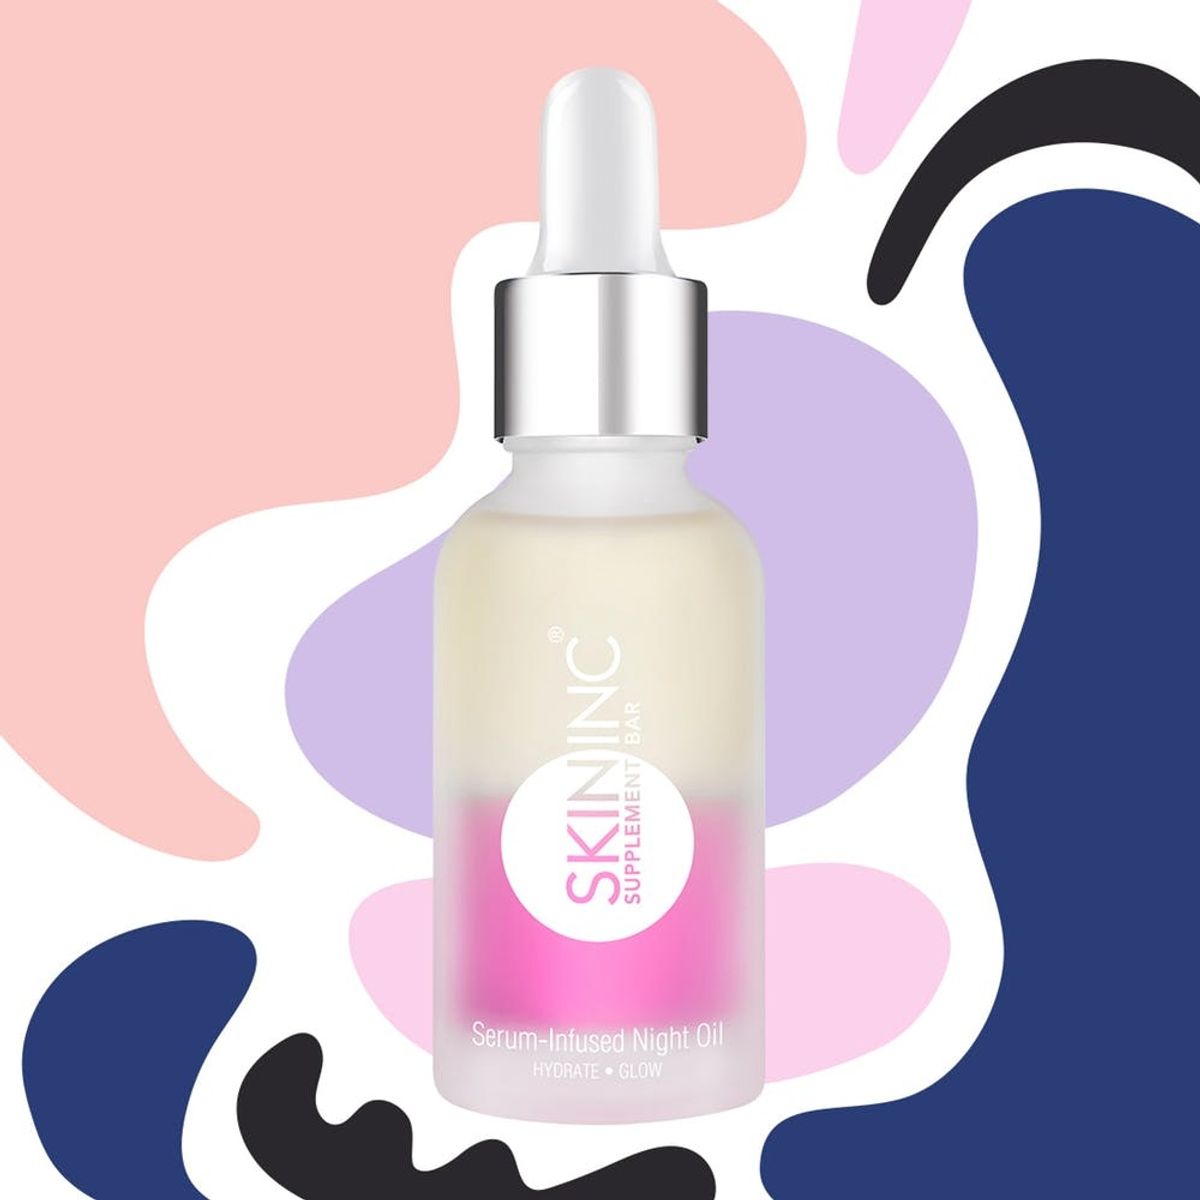 This New Face Oil-Infused Serum Fades Acne Scars Overnight